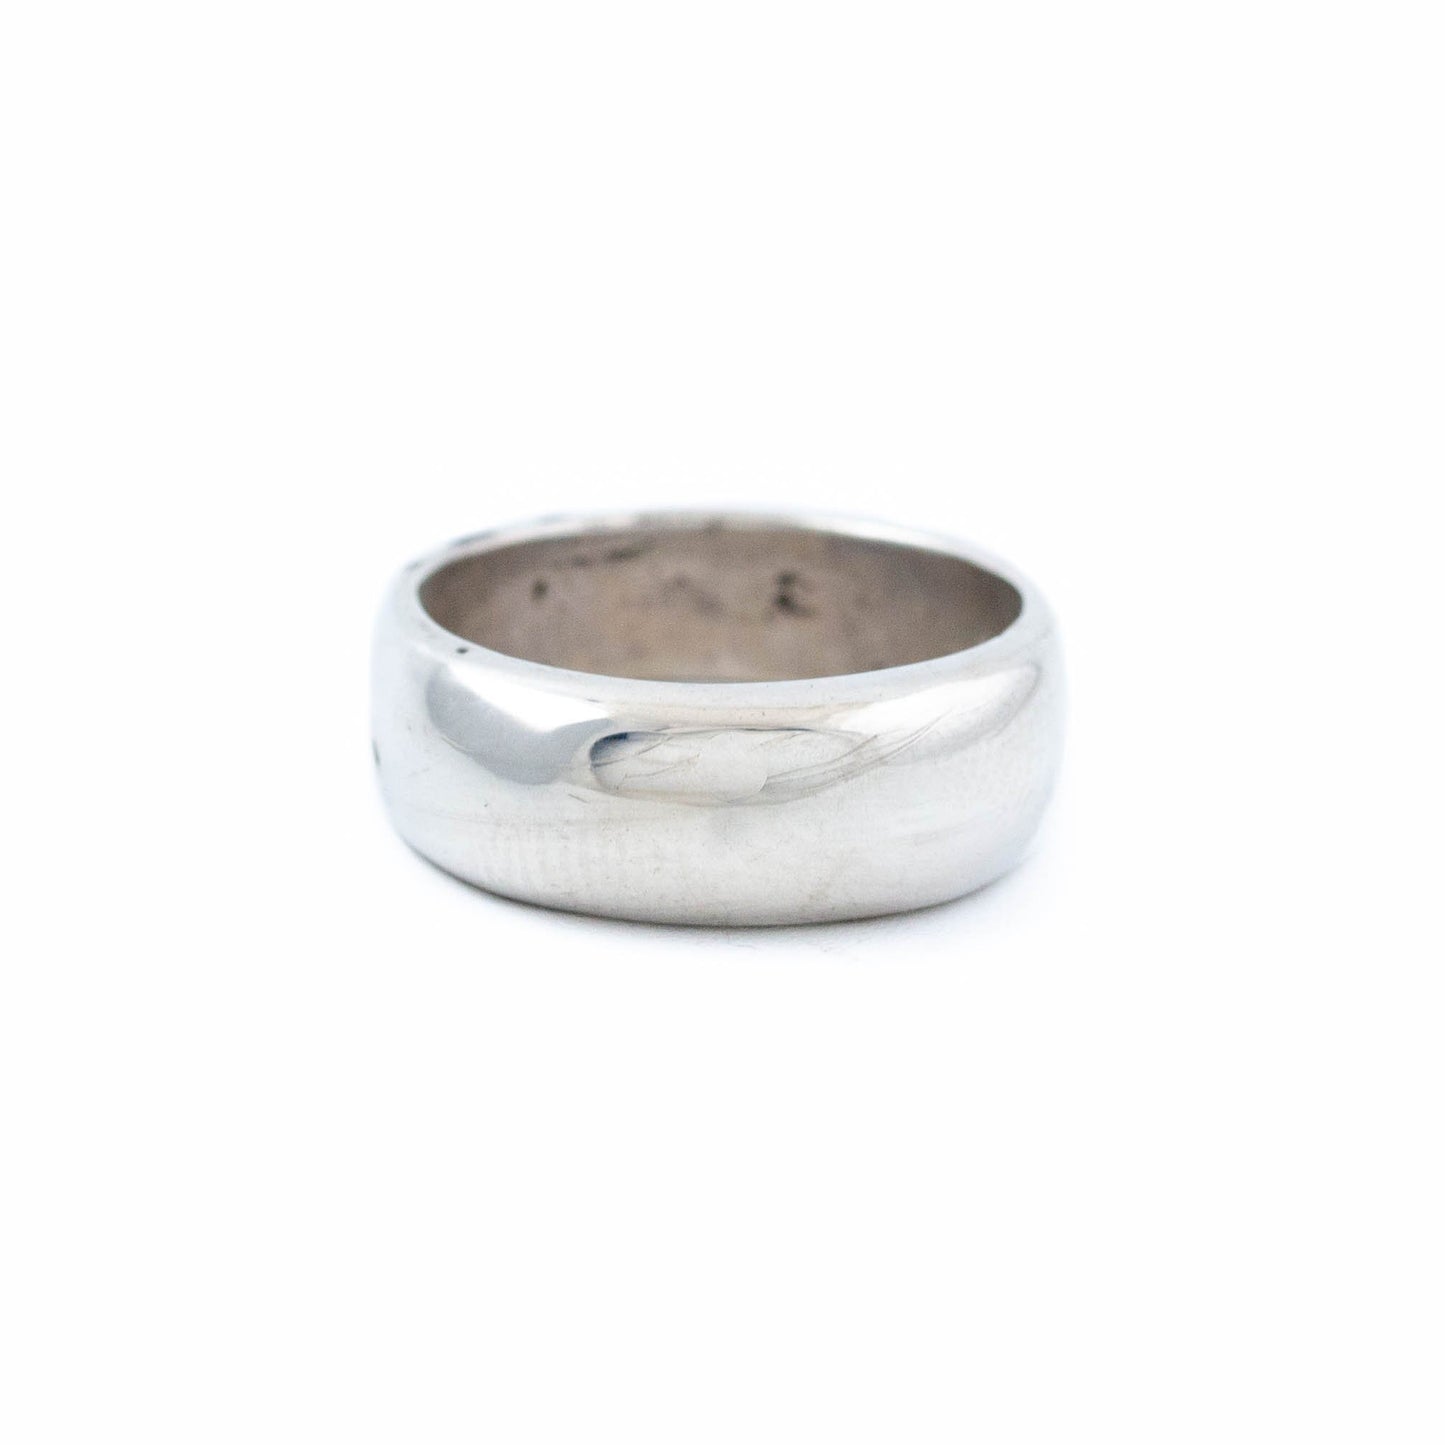 Rounded Square-Cut Silver Ring - Kingdom Jewelry